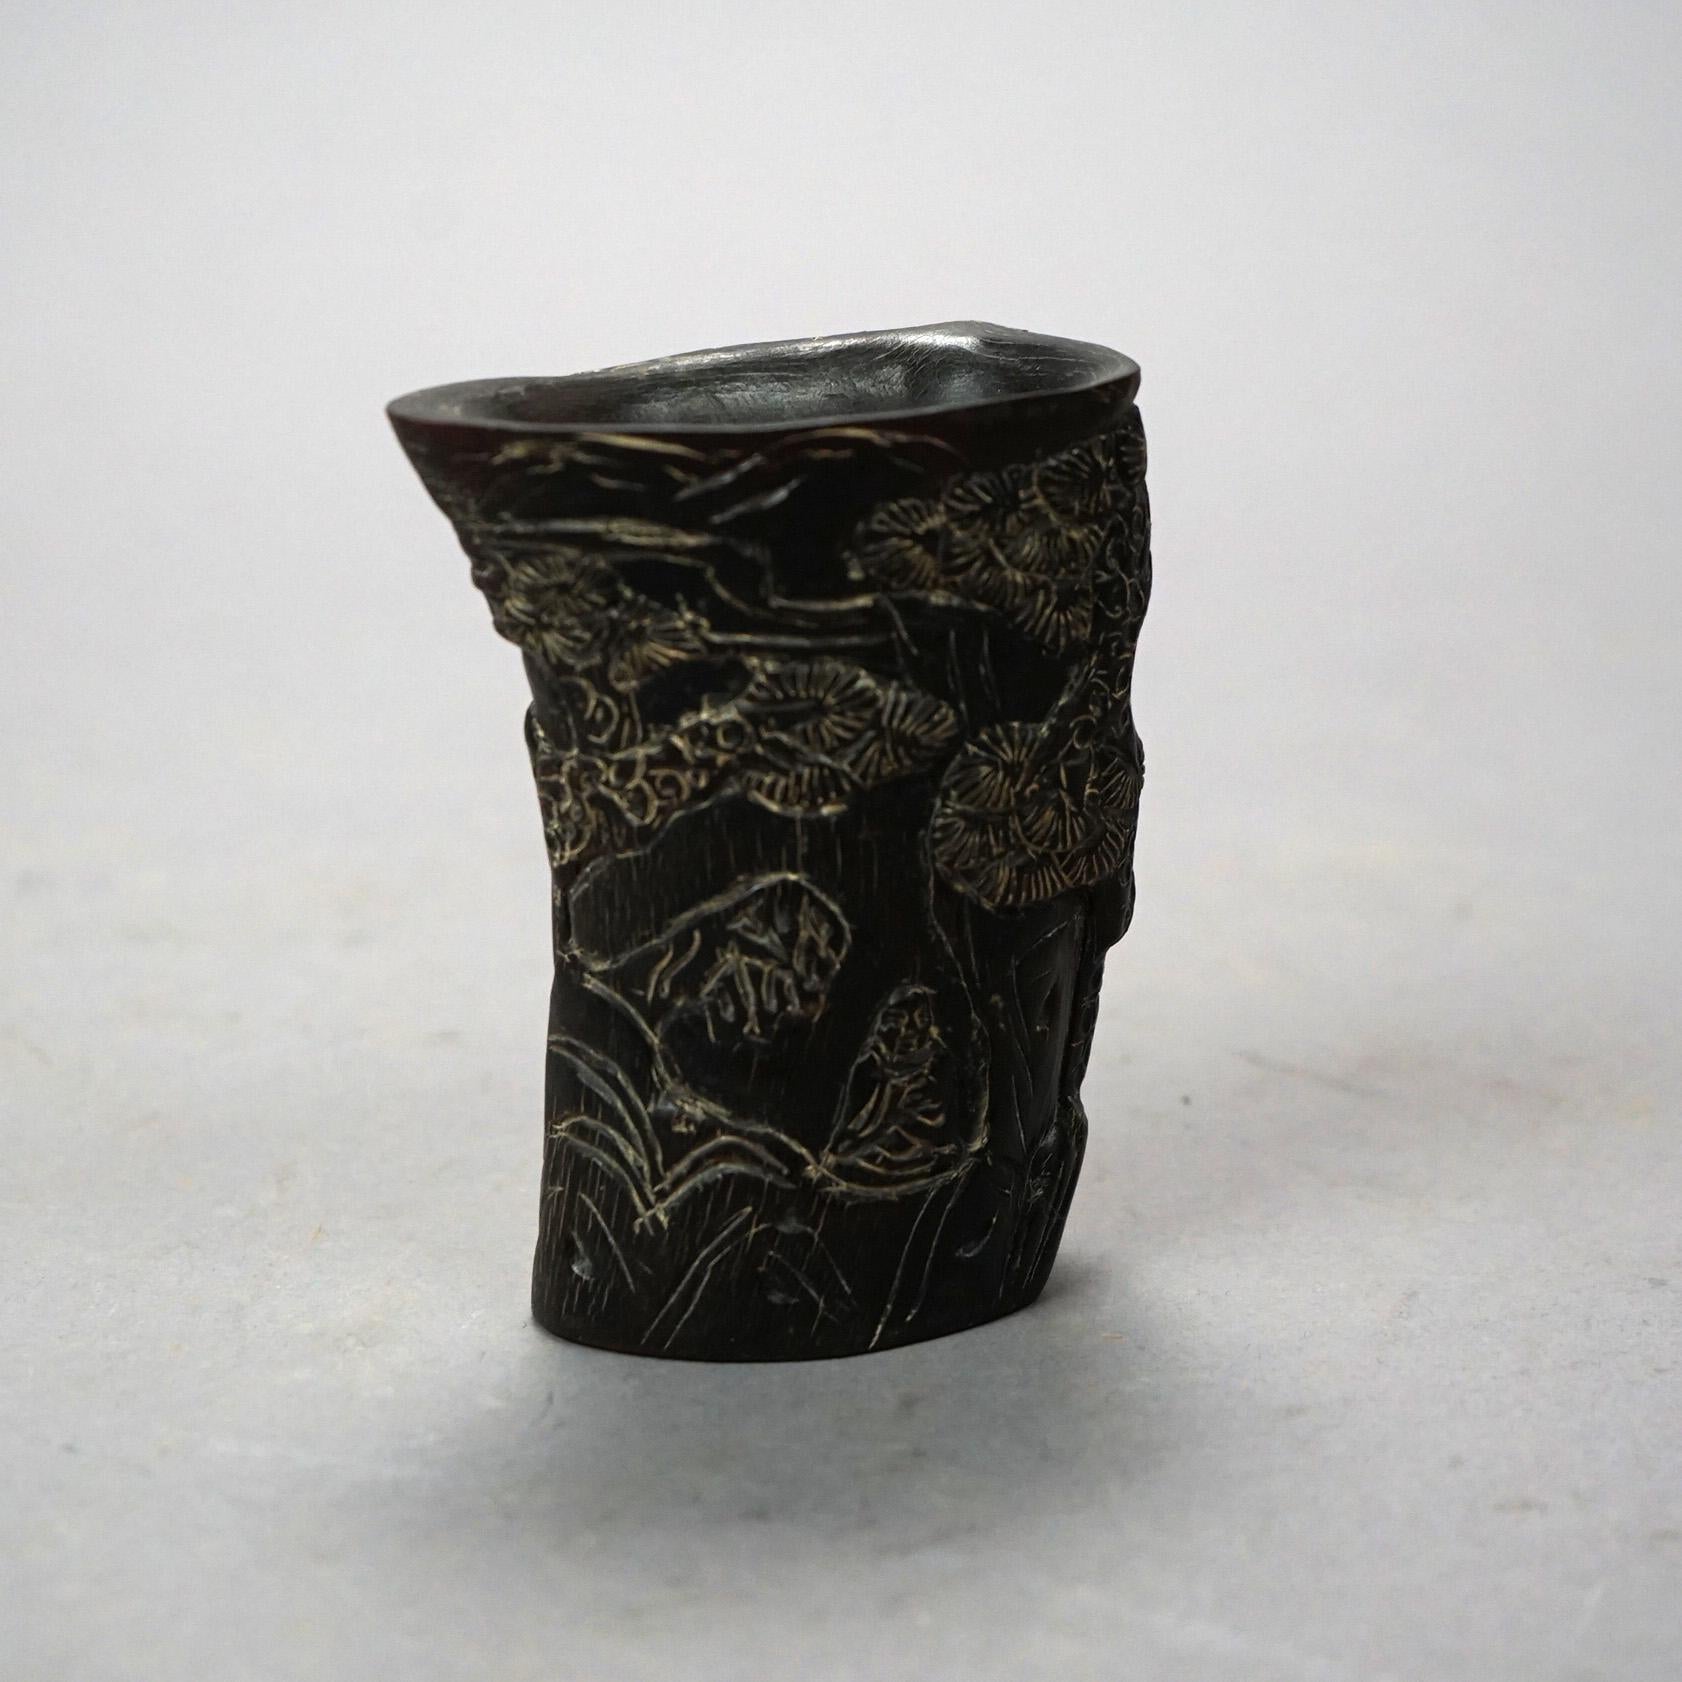 Asian Carved Libation Cup, Genre Scene with Men in Chess Game, 20th C.  

Measures - 4